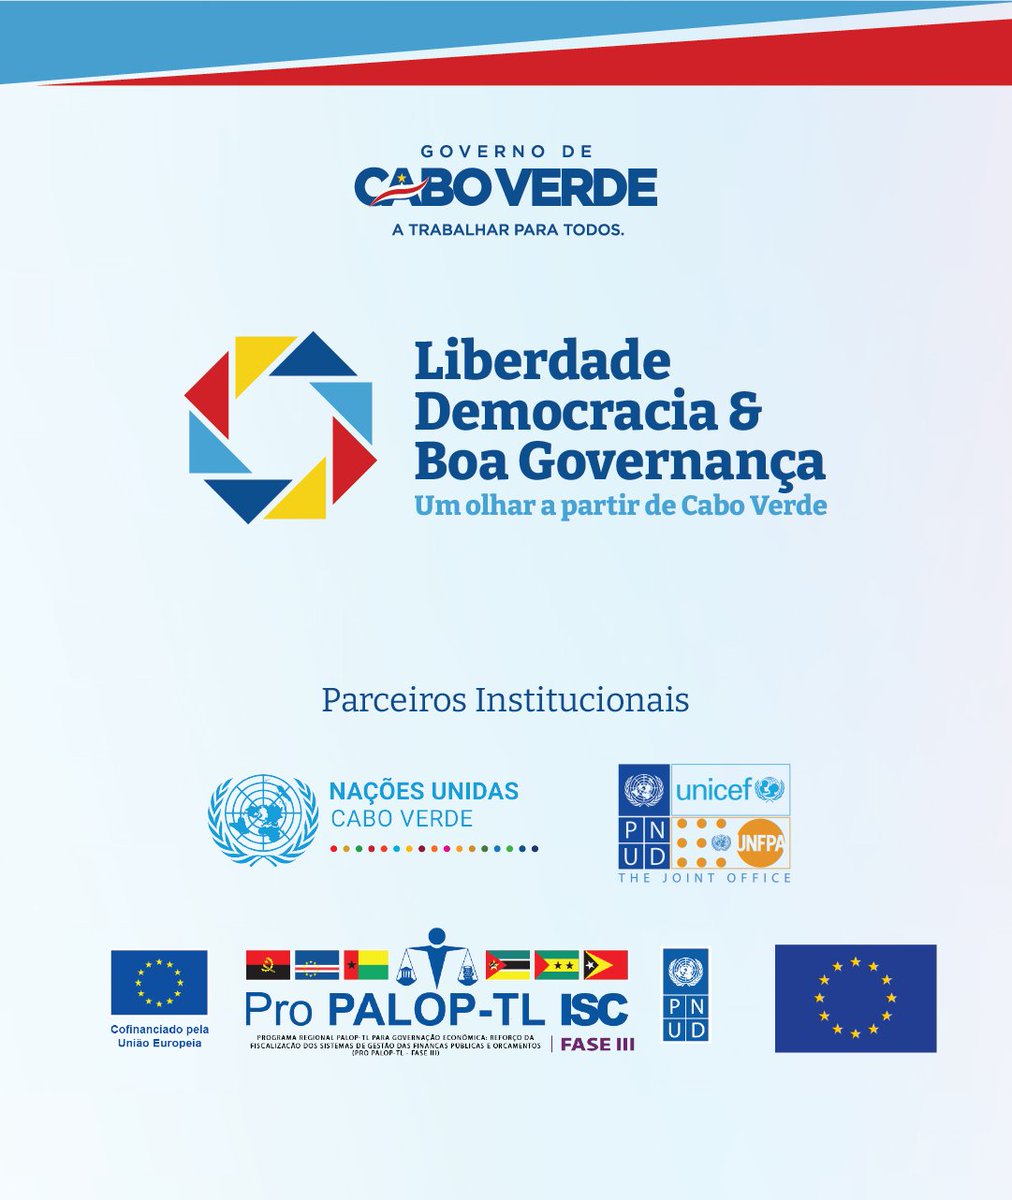 #HappeningNow International Conference on Freedom, Democracy and Good Governance: a look from Cabo Verde

facebook.com/10006445190231…